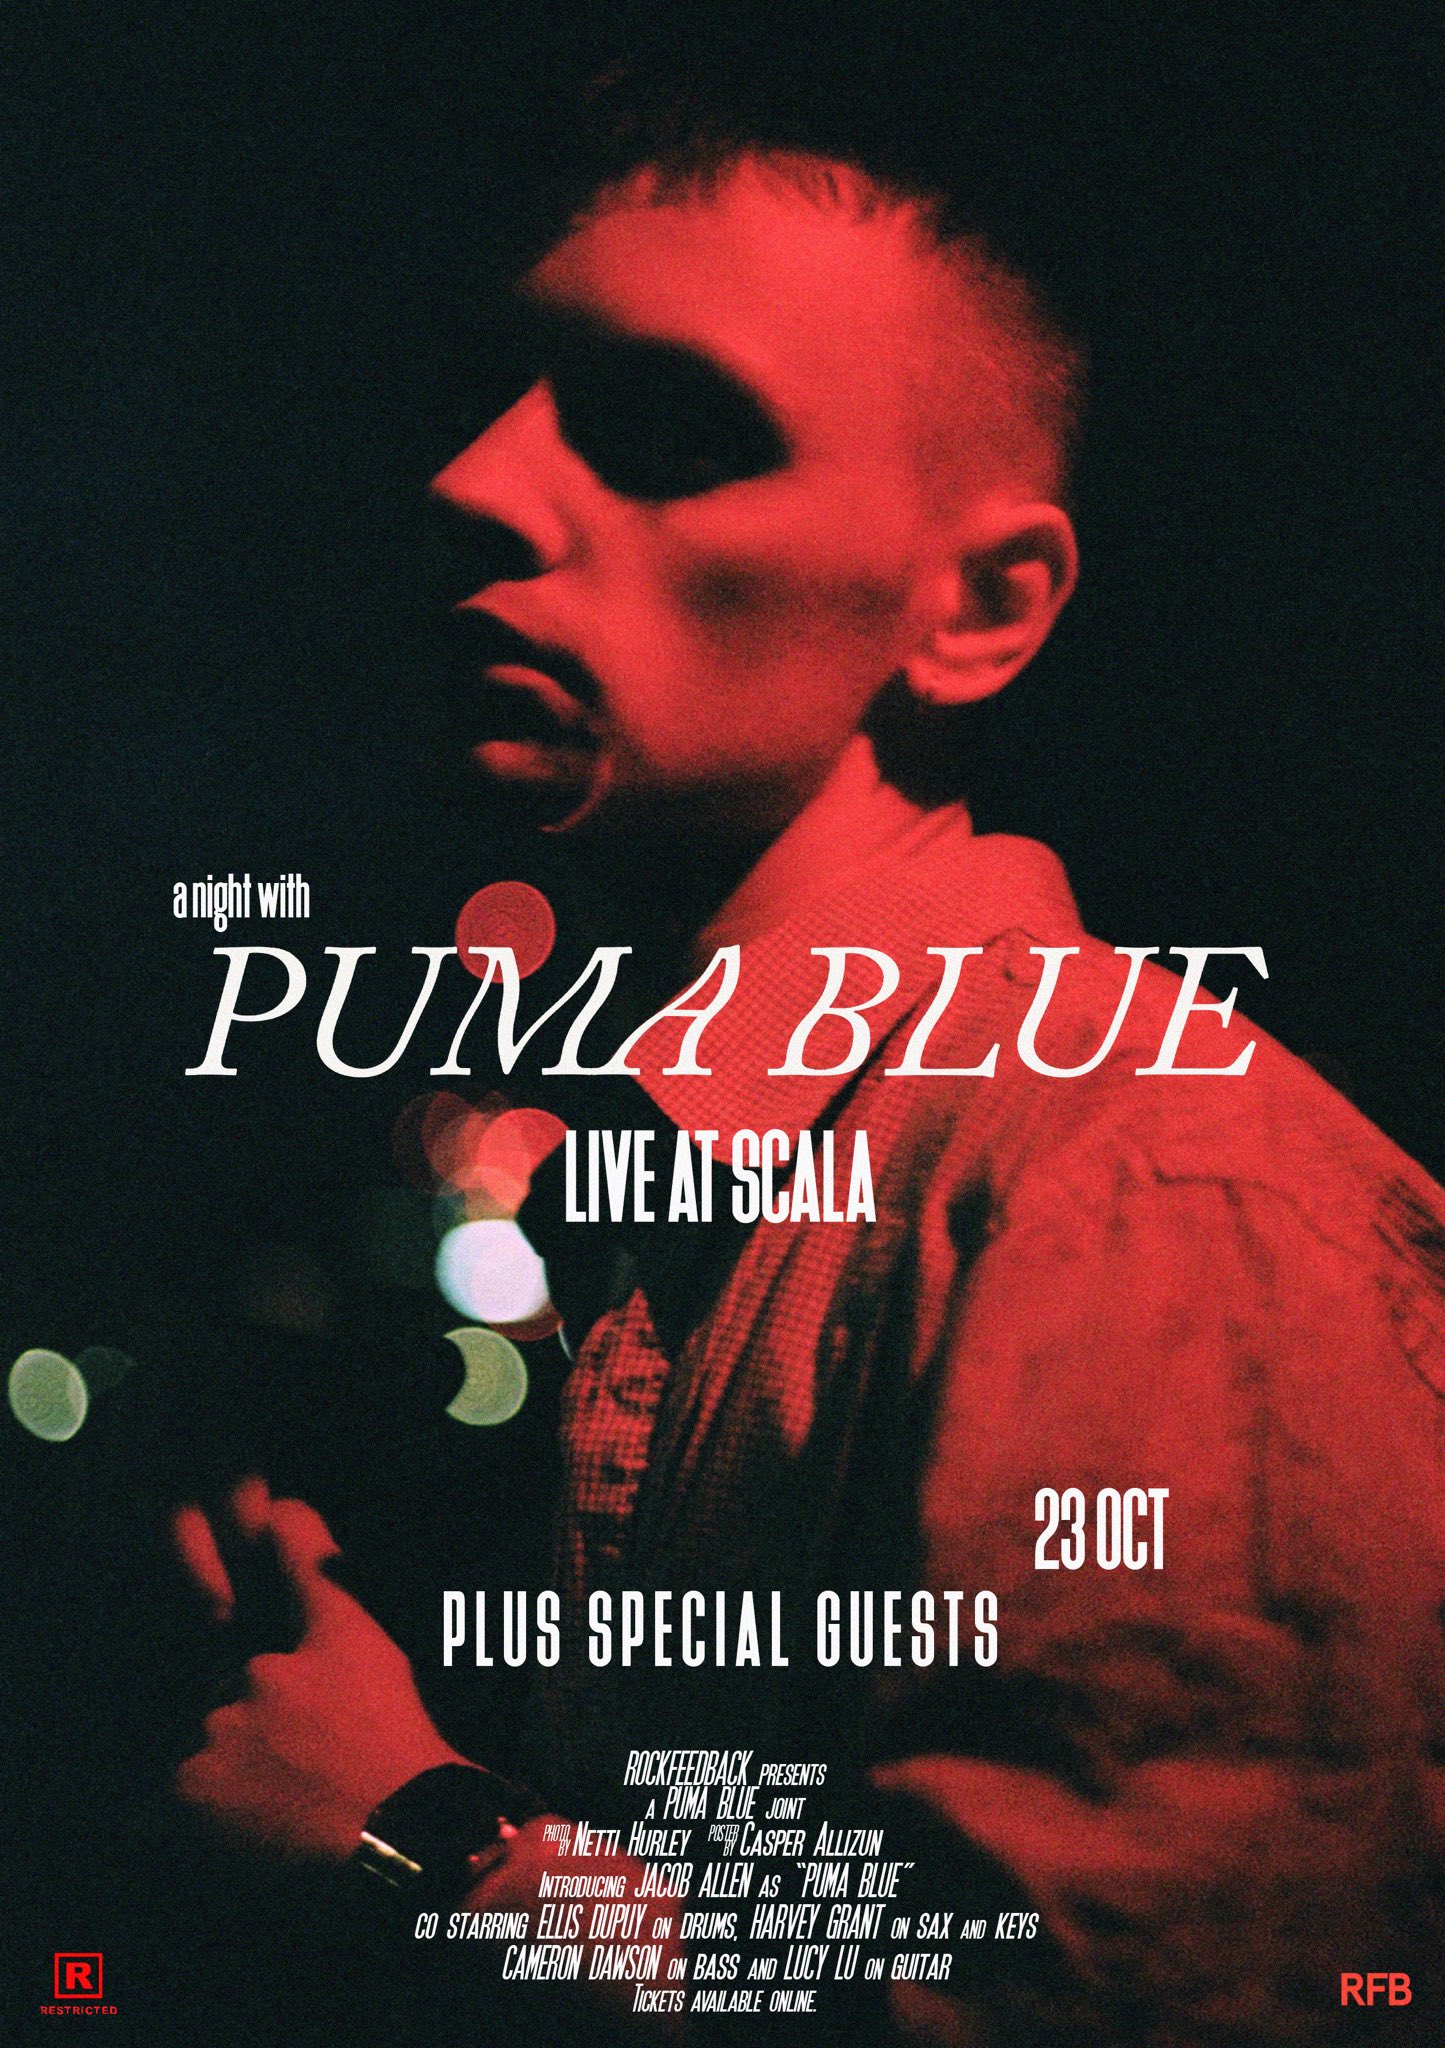 Puma Blue al Twitter: "coming soon to a venue near you... very excited to  play this show, seems surreal to have a date booked in such a burly venue  come share the